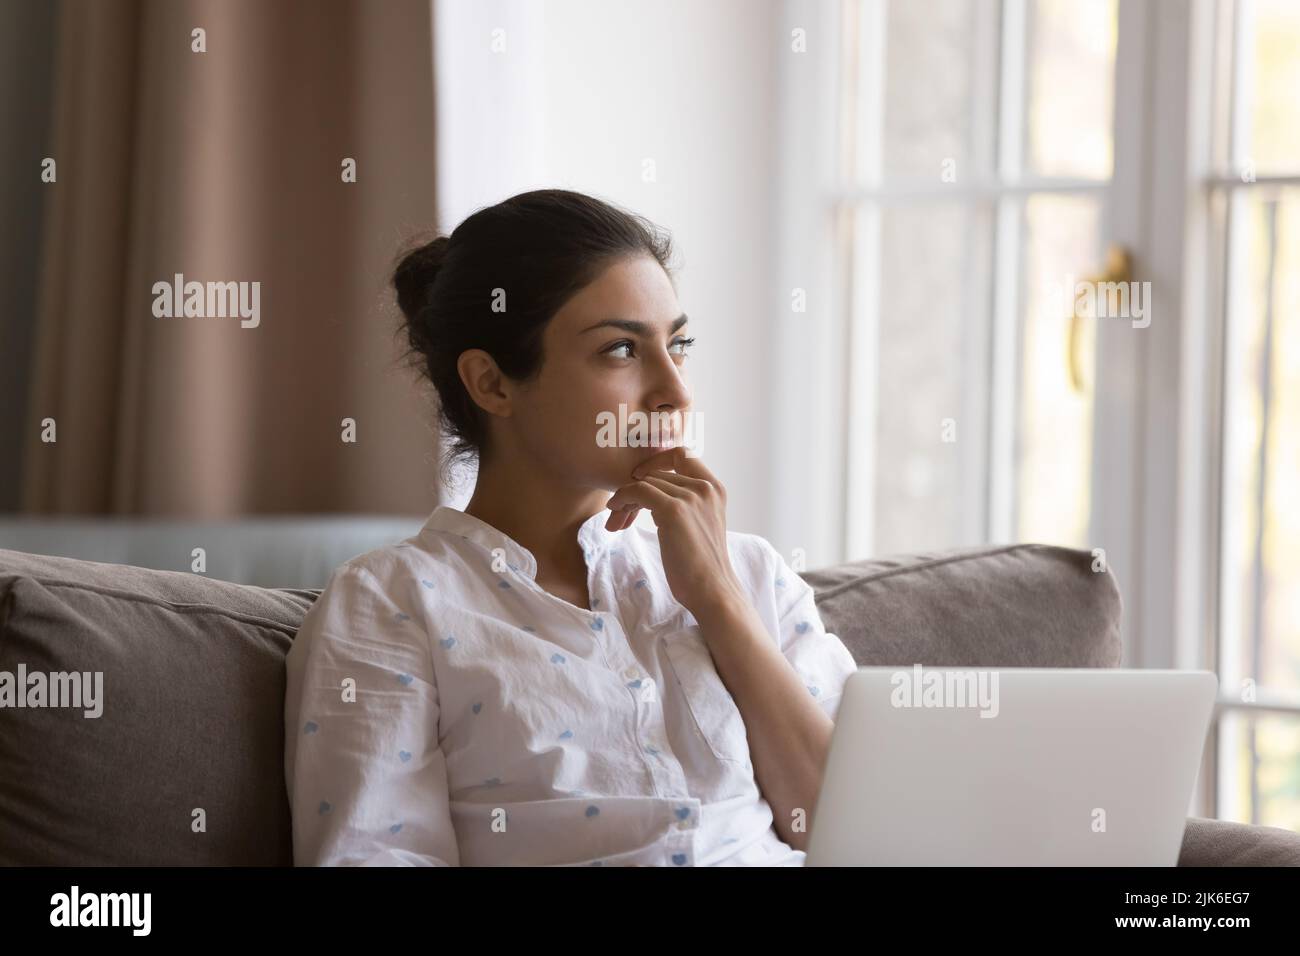 Dreamy beautiful young Indian woman holding laptop on lap Stock Photo